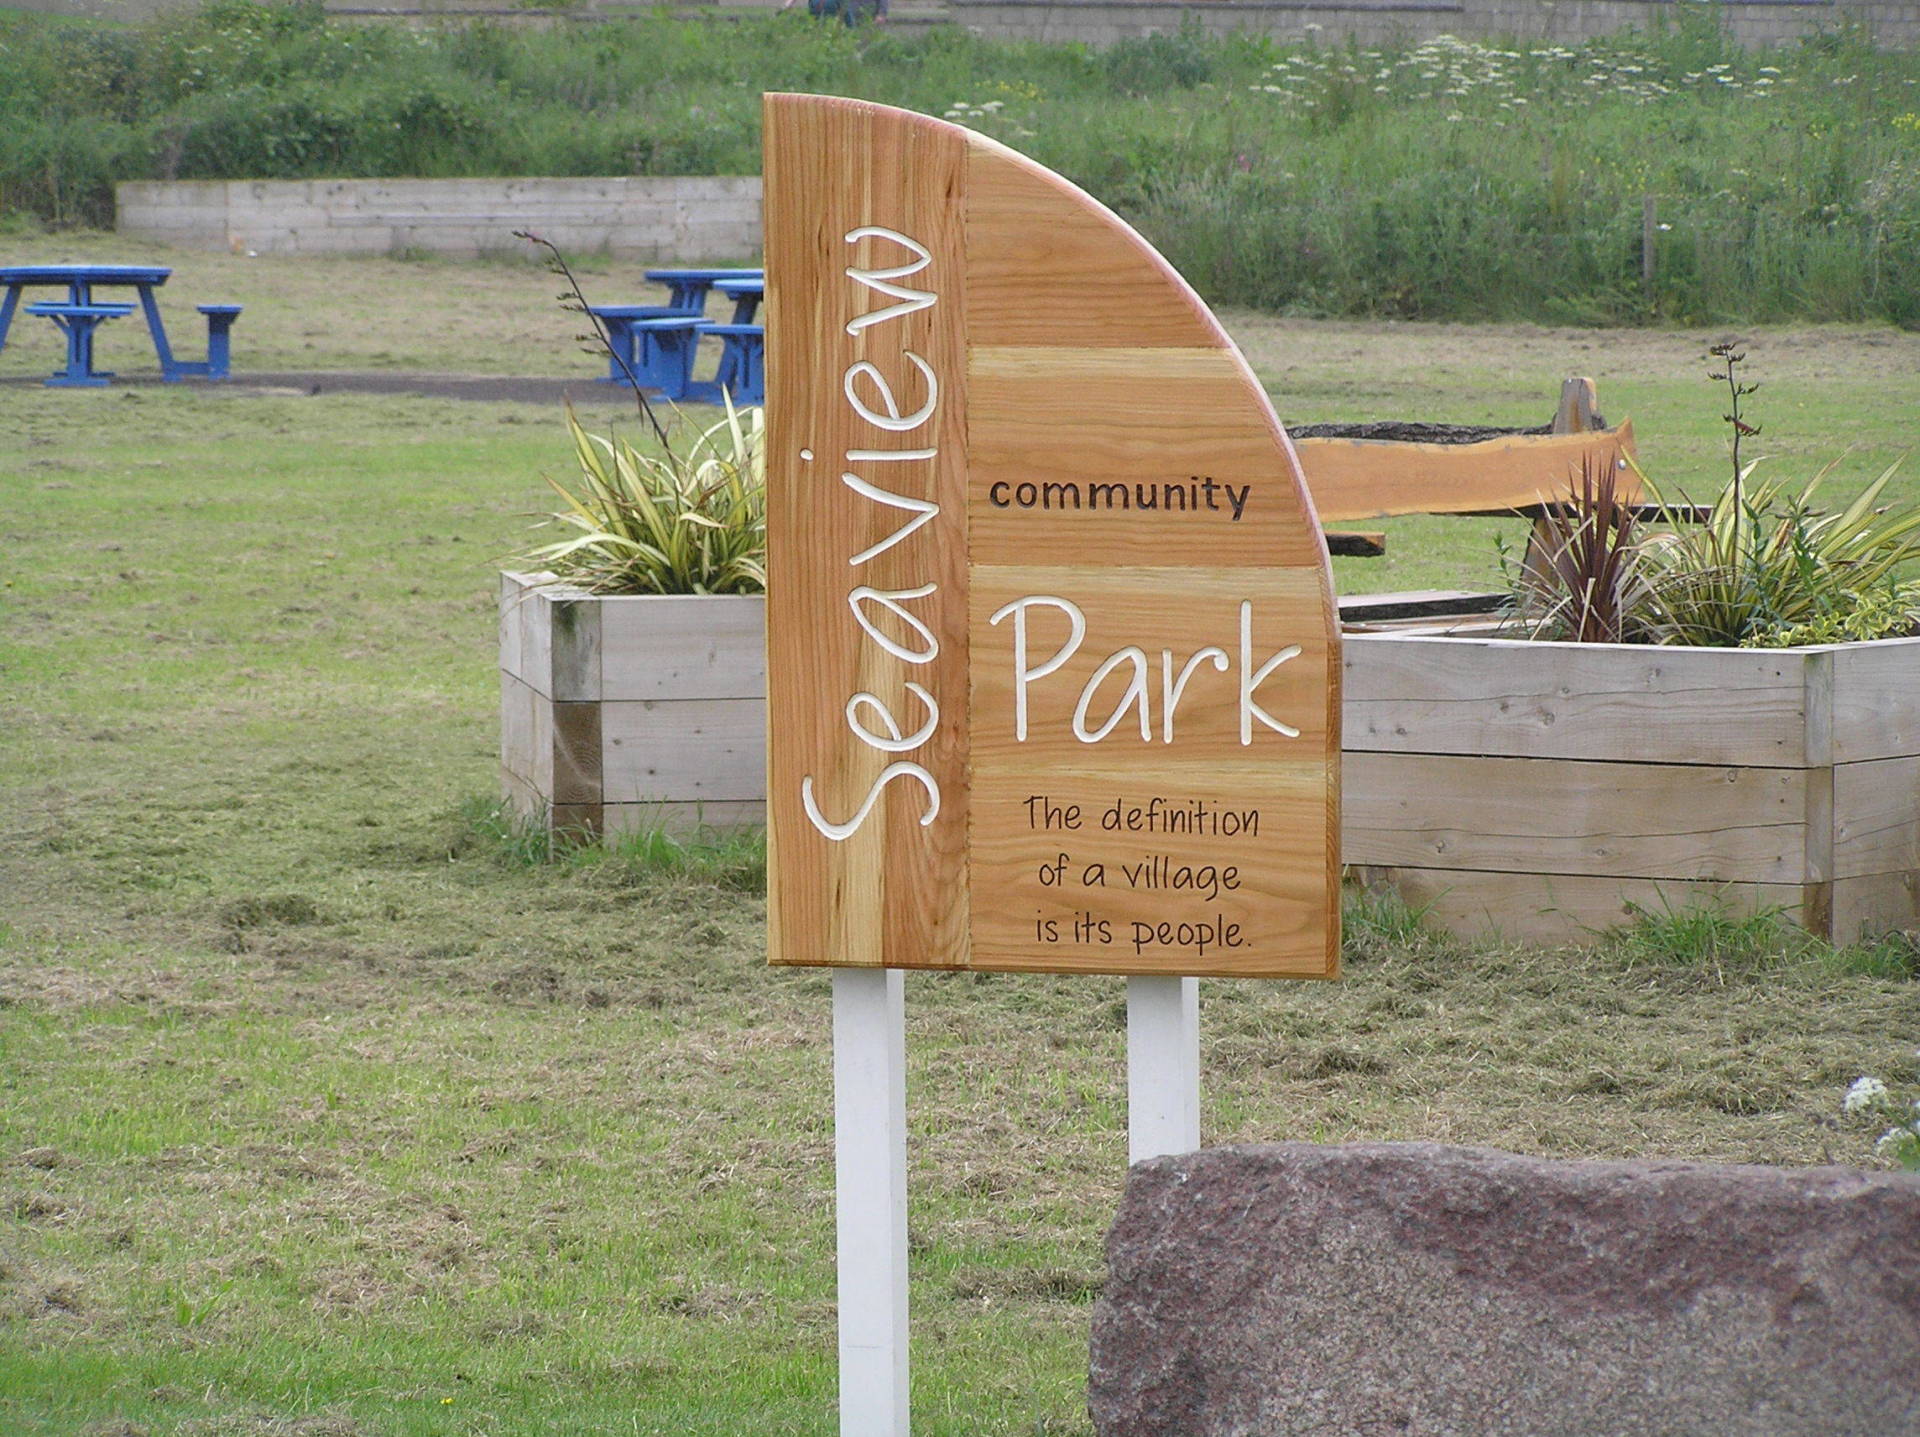 Wooden Eco-friendly Community sign by Ingrained Culture